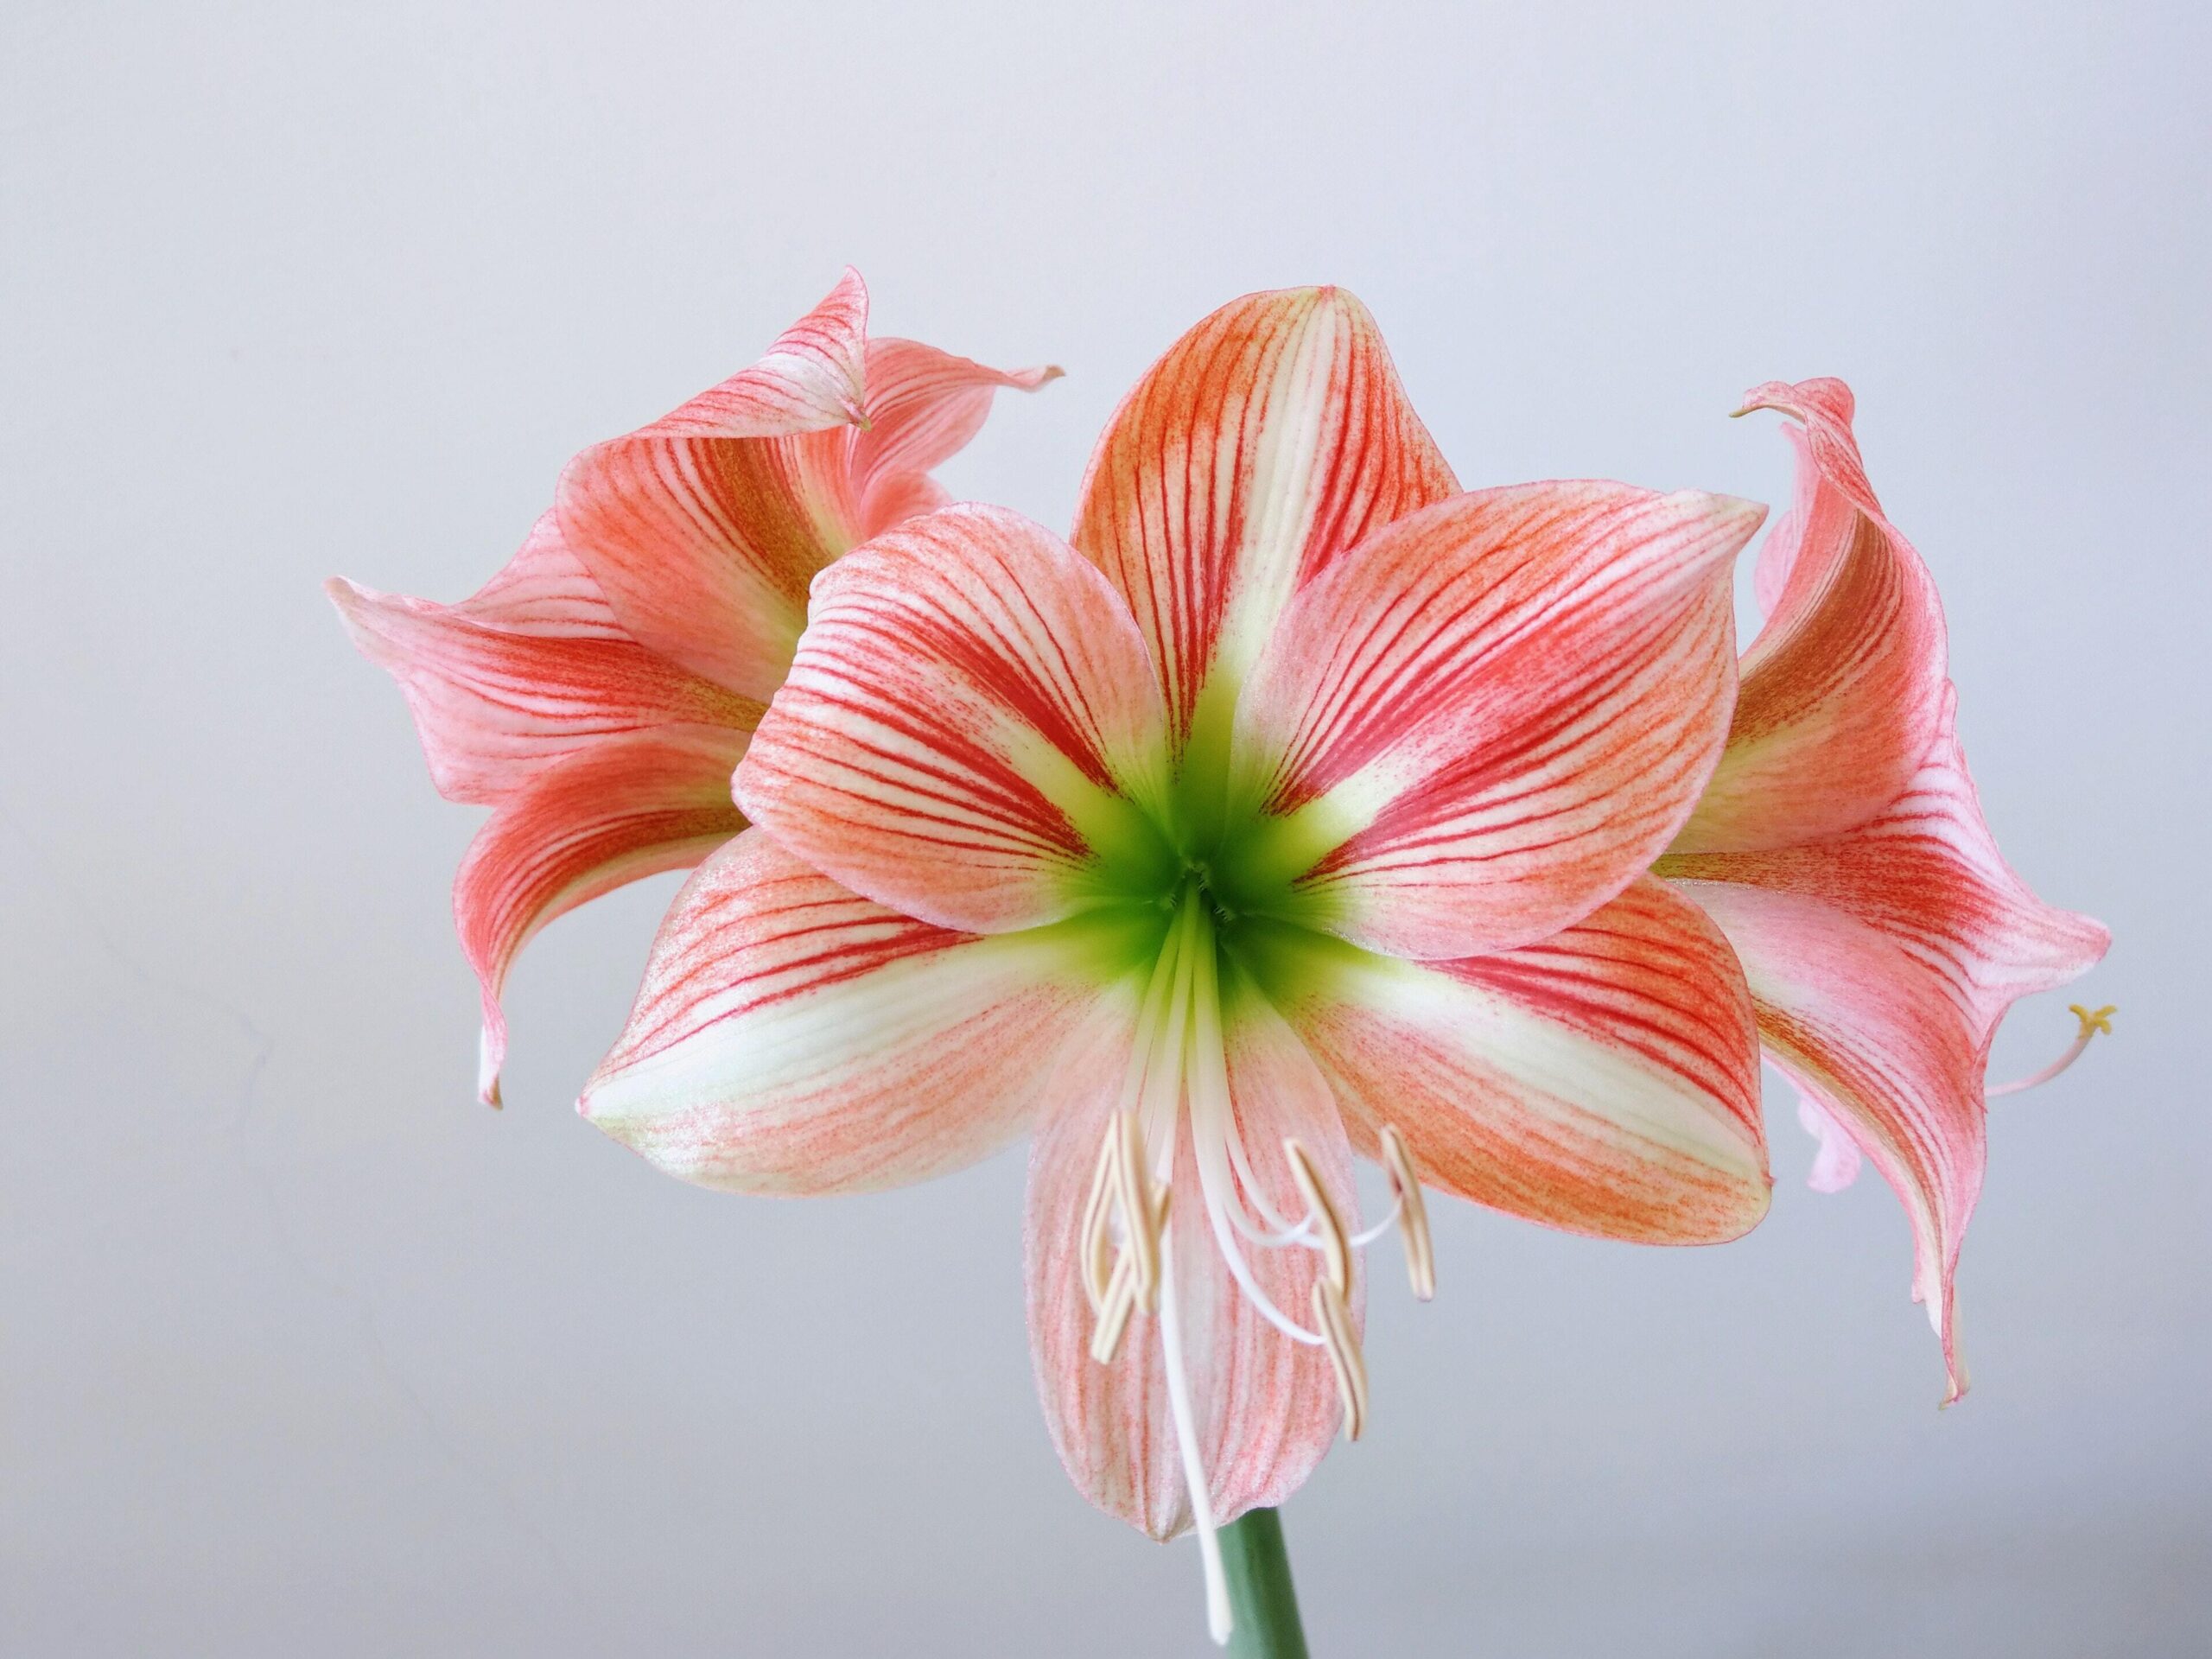 A bicolored Amaryllis in full flower. If the pollen is an issue simply cut off the stamens. Once the flower fades cut it off and don’t let a seed pod form or it will reduce the size of the bulb and the flowers for next year.  TU HAN-WEI